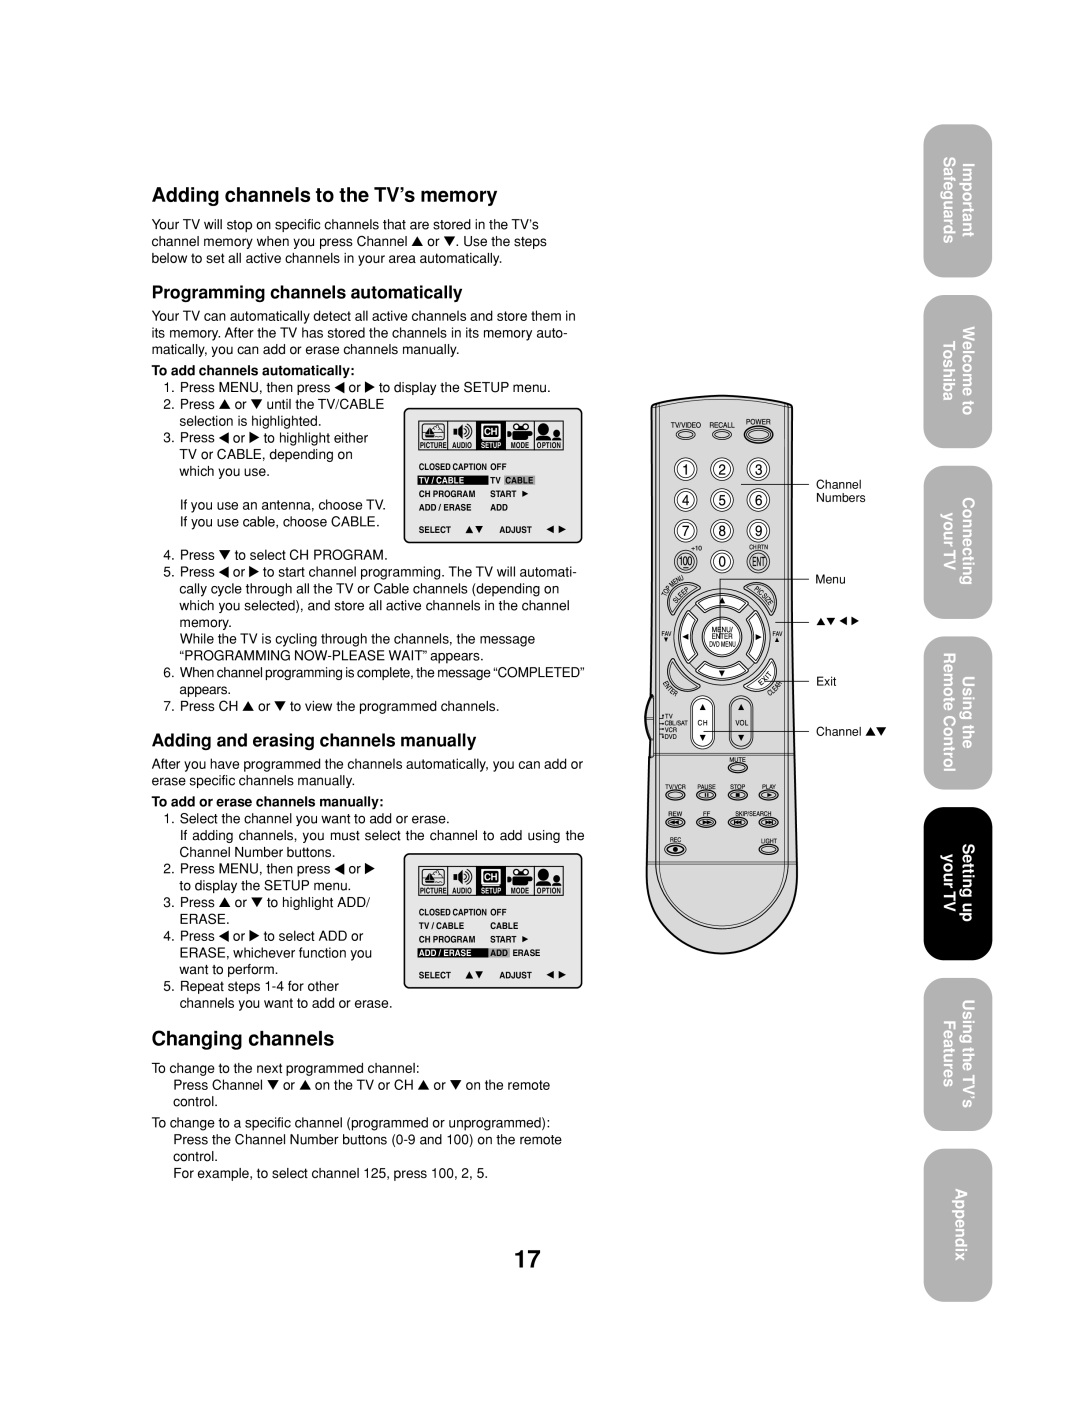 Toshiba 27AF53 appendix Adding channels to the TV’s memory, Changing channels, Programming channels automatically 